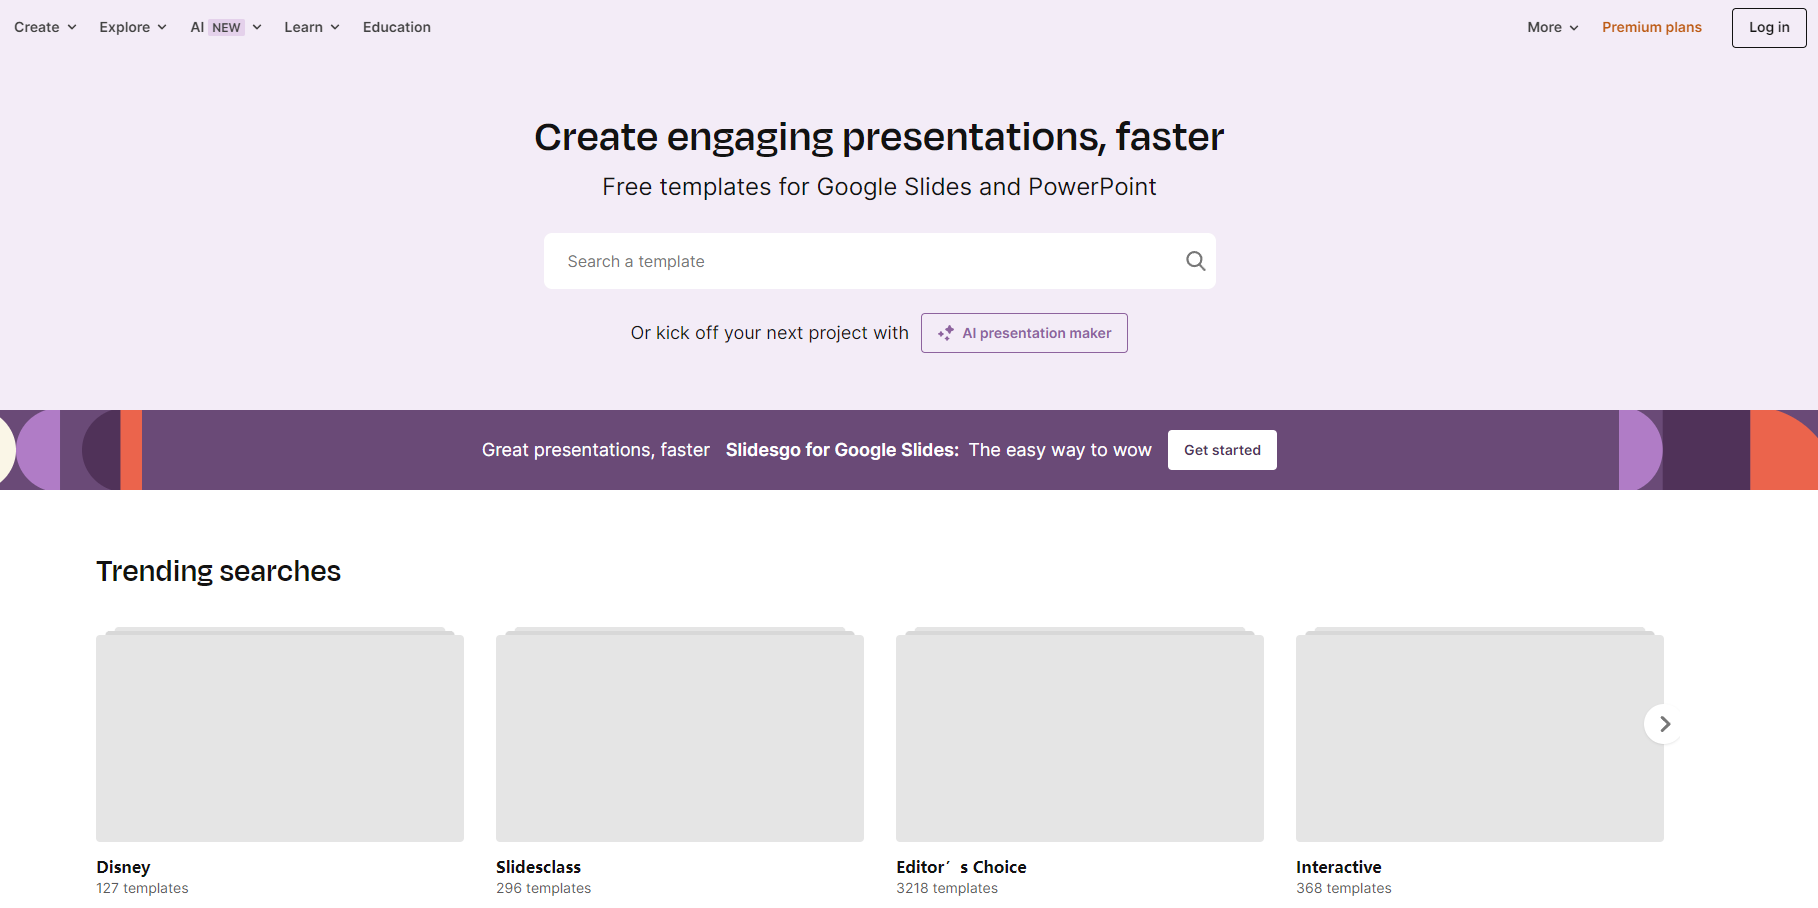 This tool provides access to free templates via Google Slides and now has the AI Presentation Maker